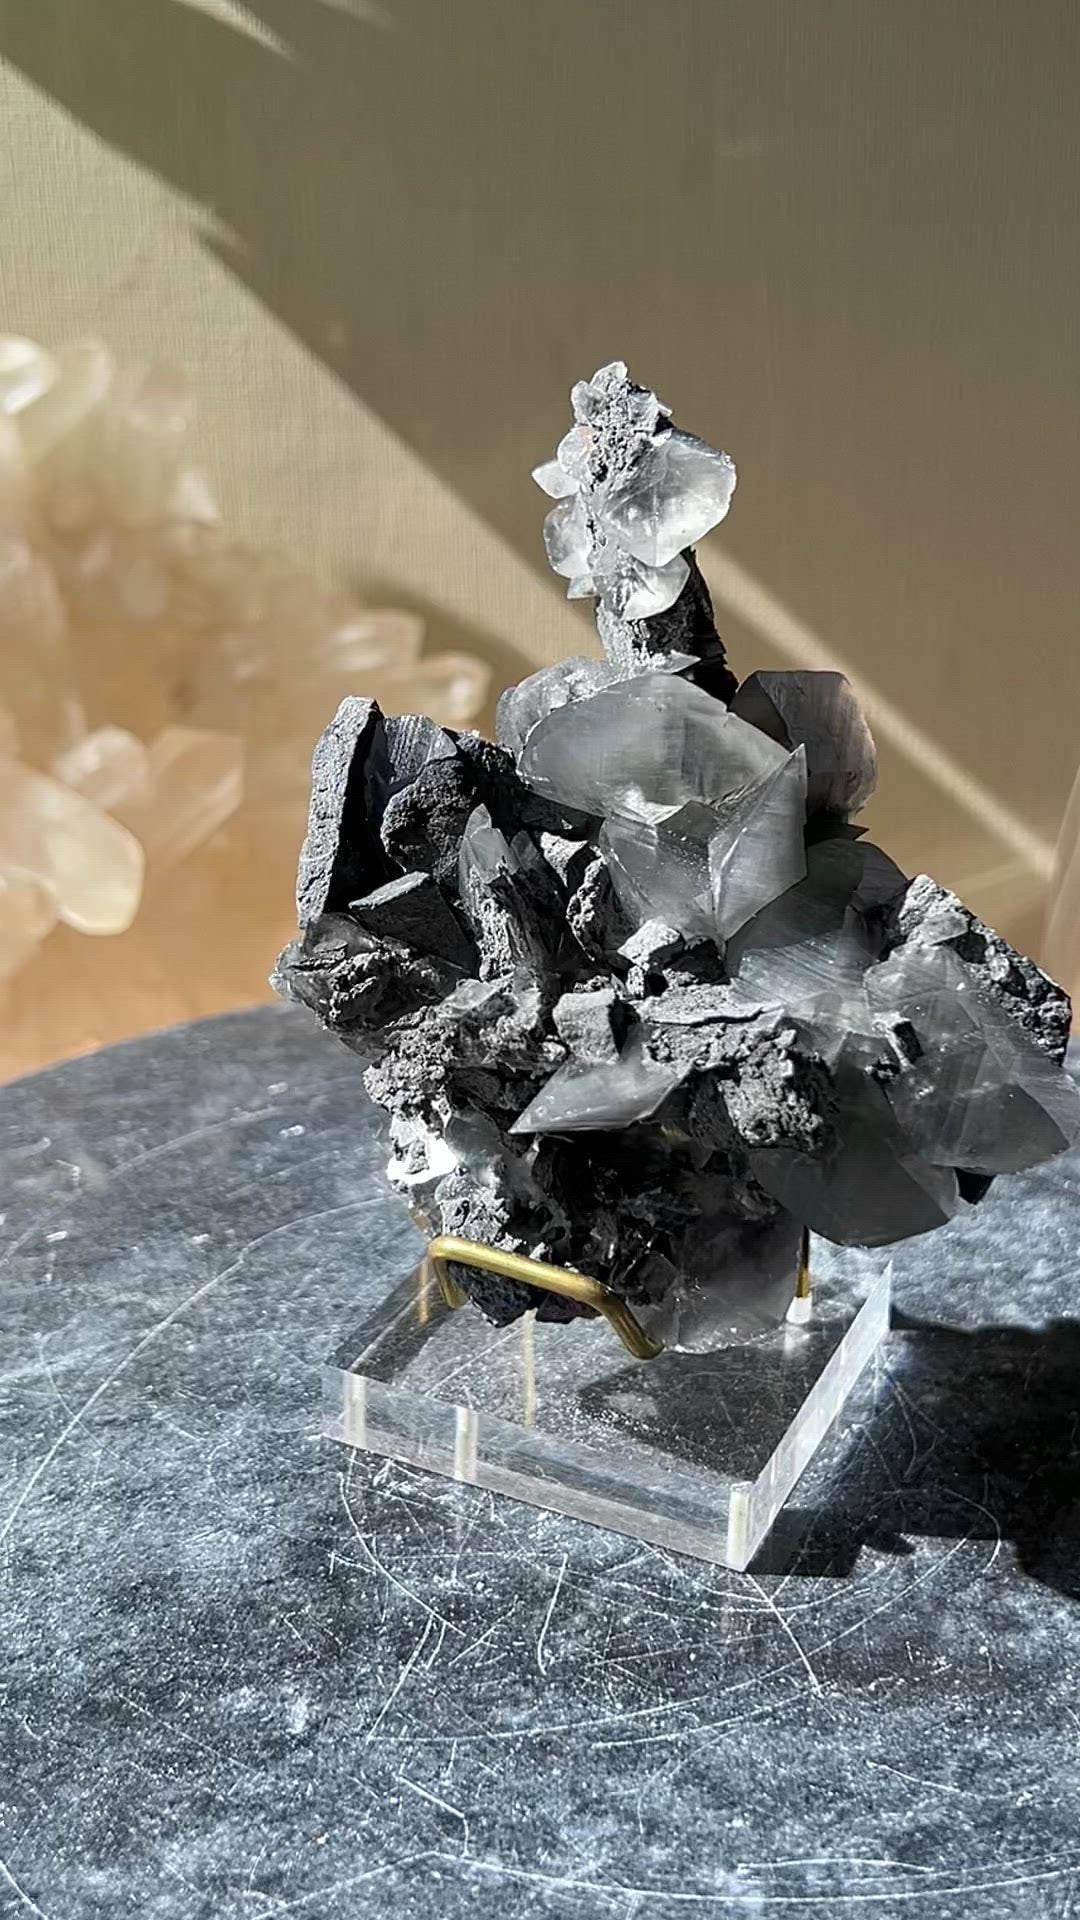 [Xyris] Shell Calcite on Stand